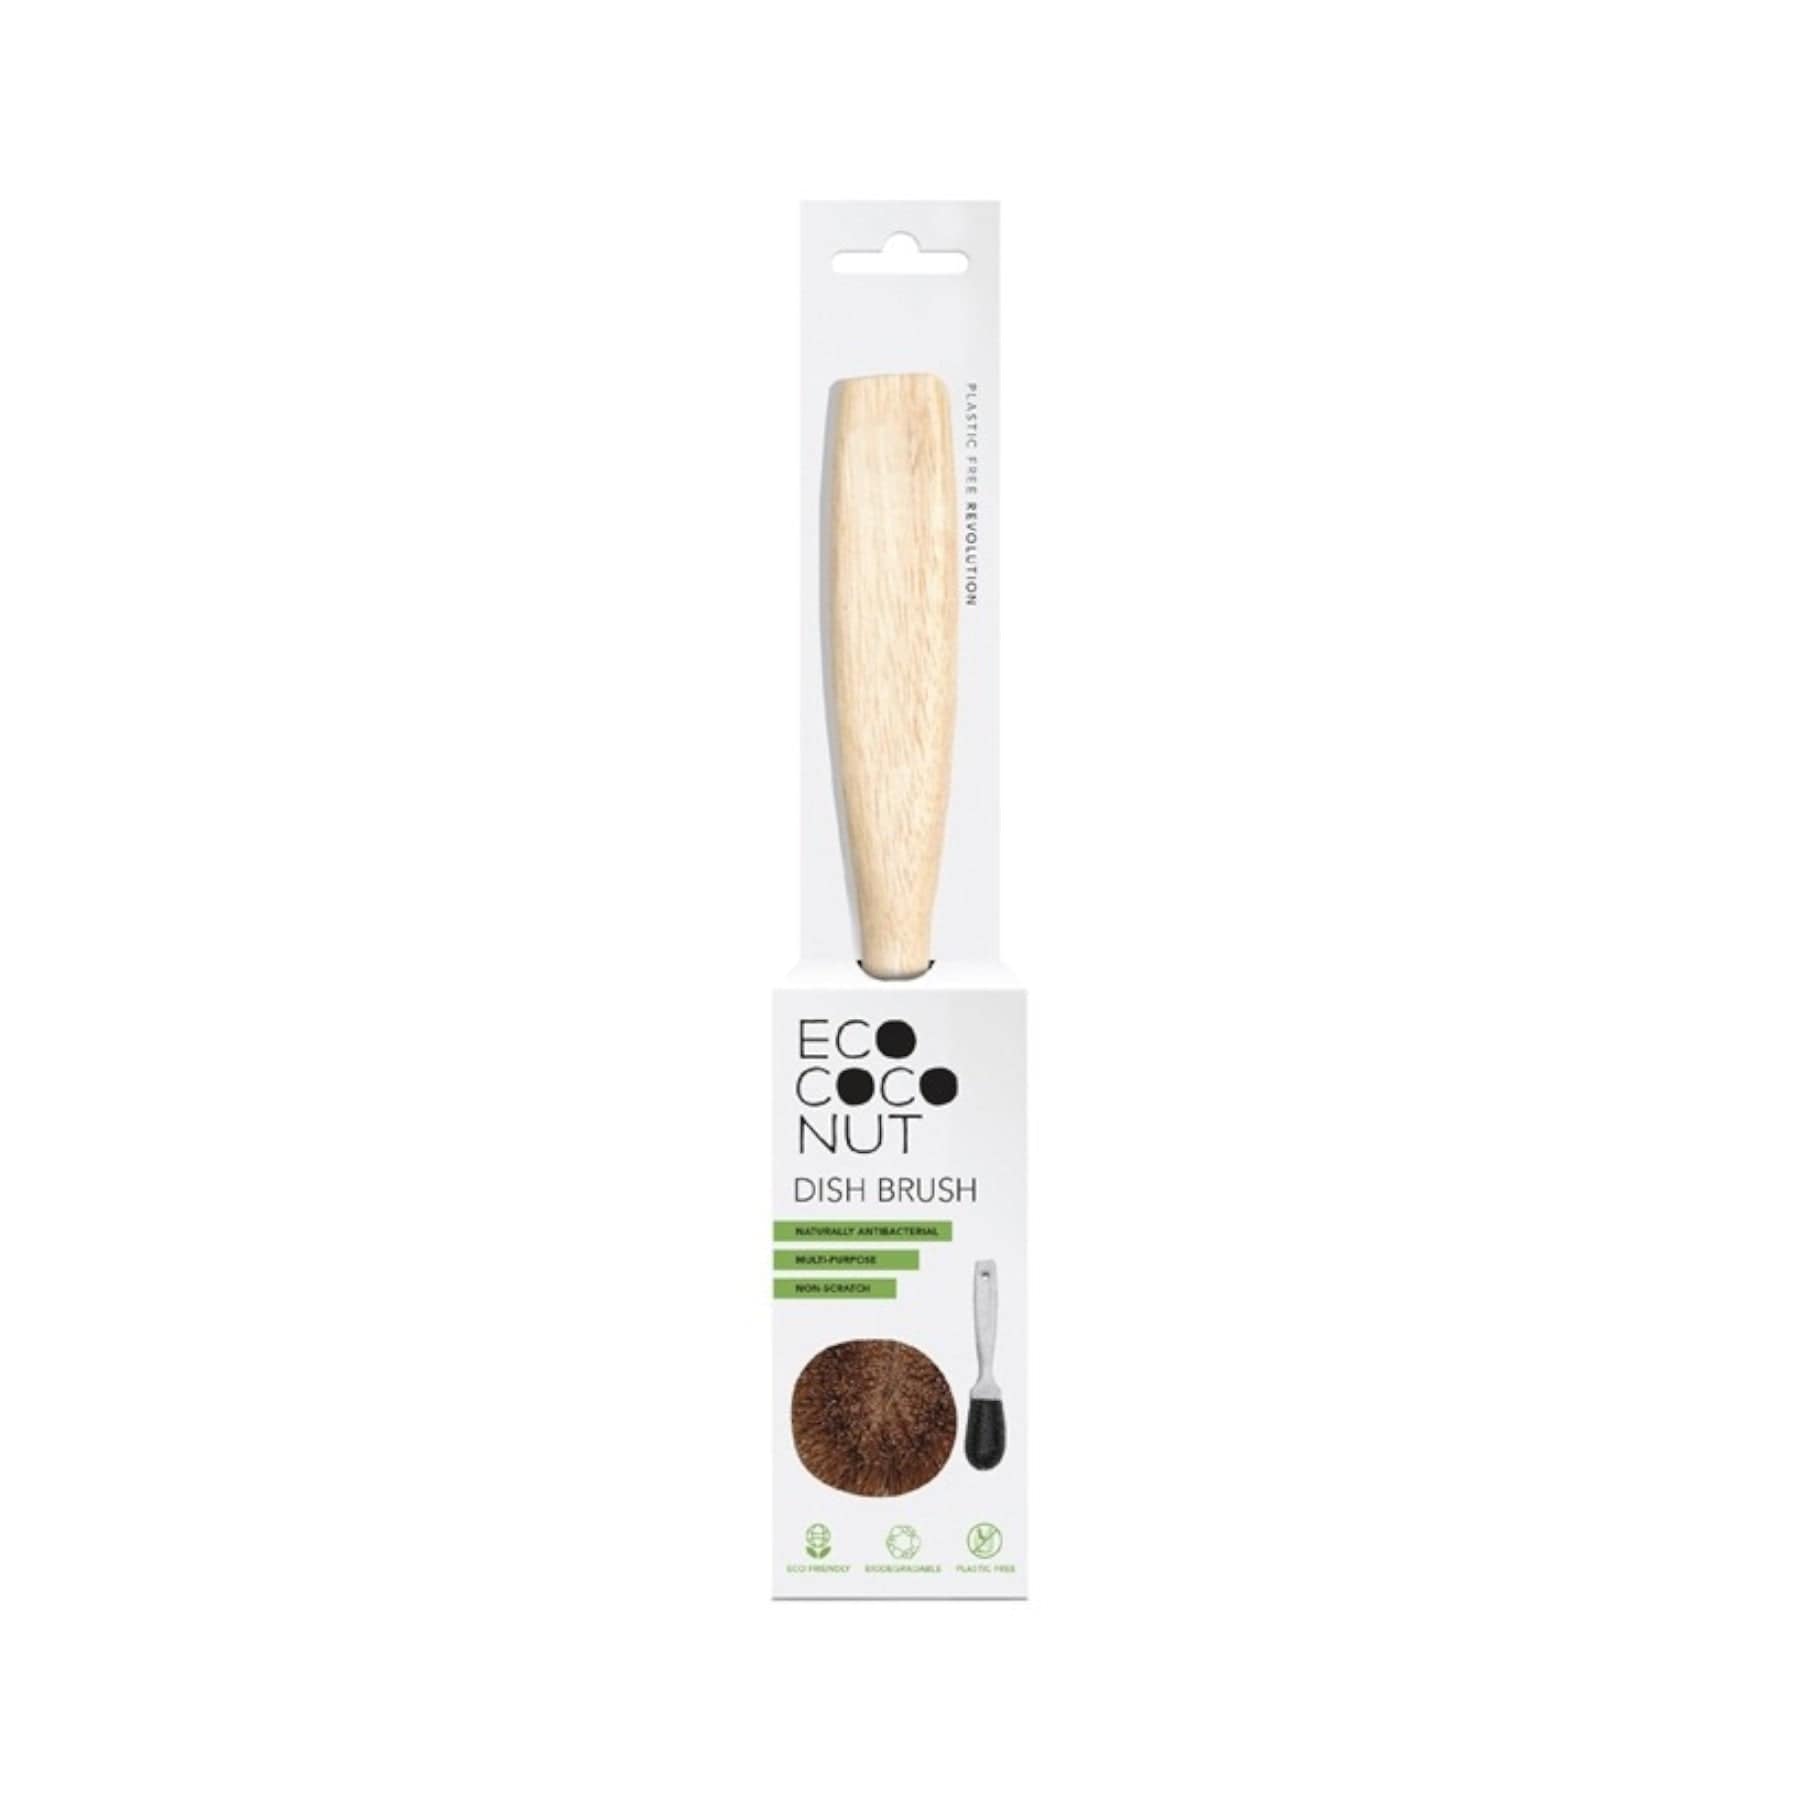 Eco-Friendly Coconut Dish Brush with Wooden Handle in Packaging